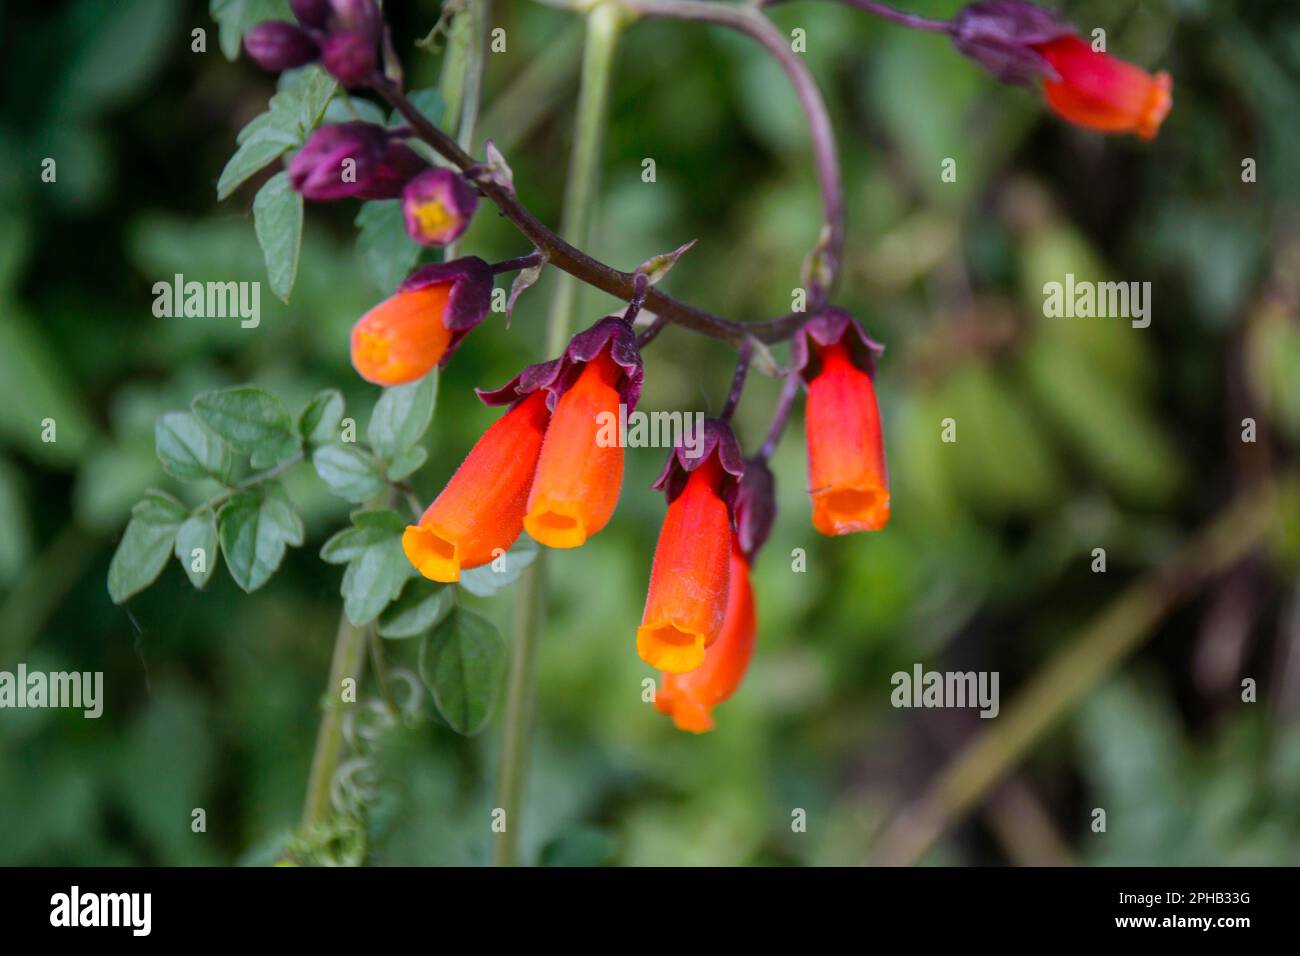 A close-up shot of a vibrant red eccremocarpus scaber flower, hanging delicately from its stem with freshness and health. Growth abounds in natures beauty! Stock Photo